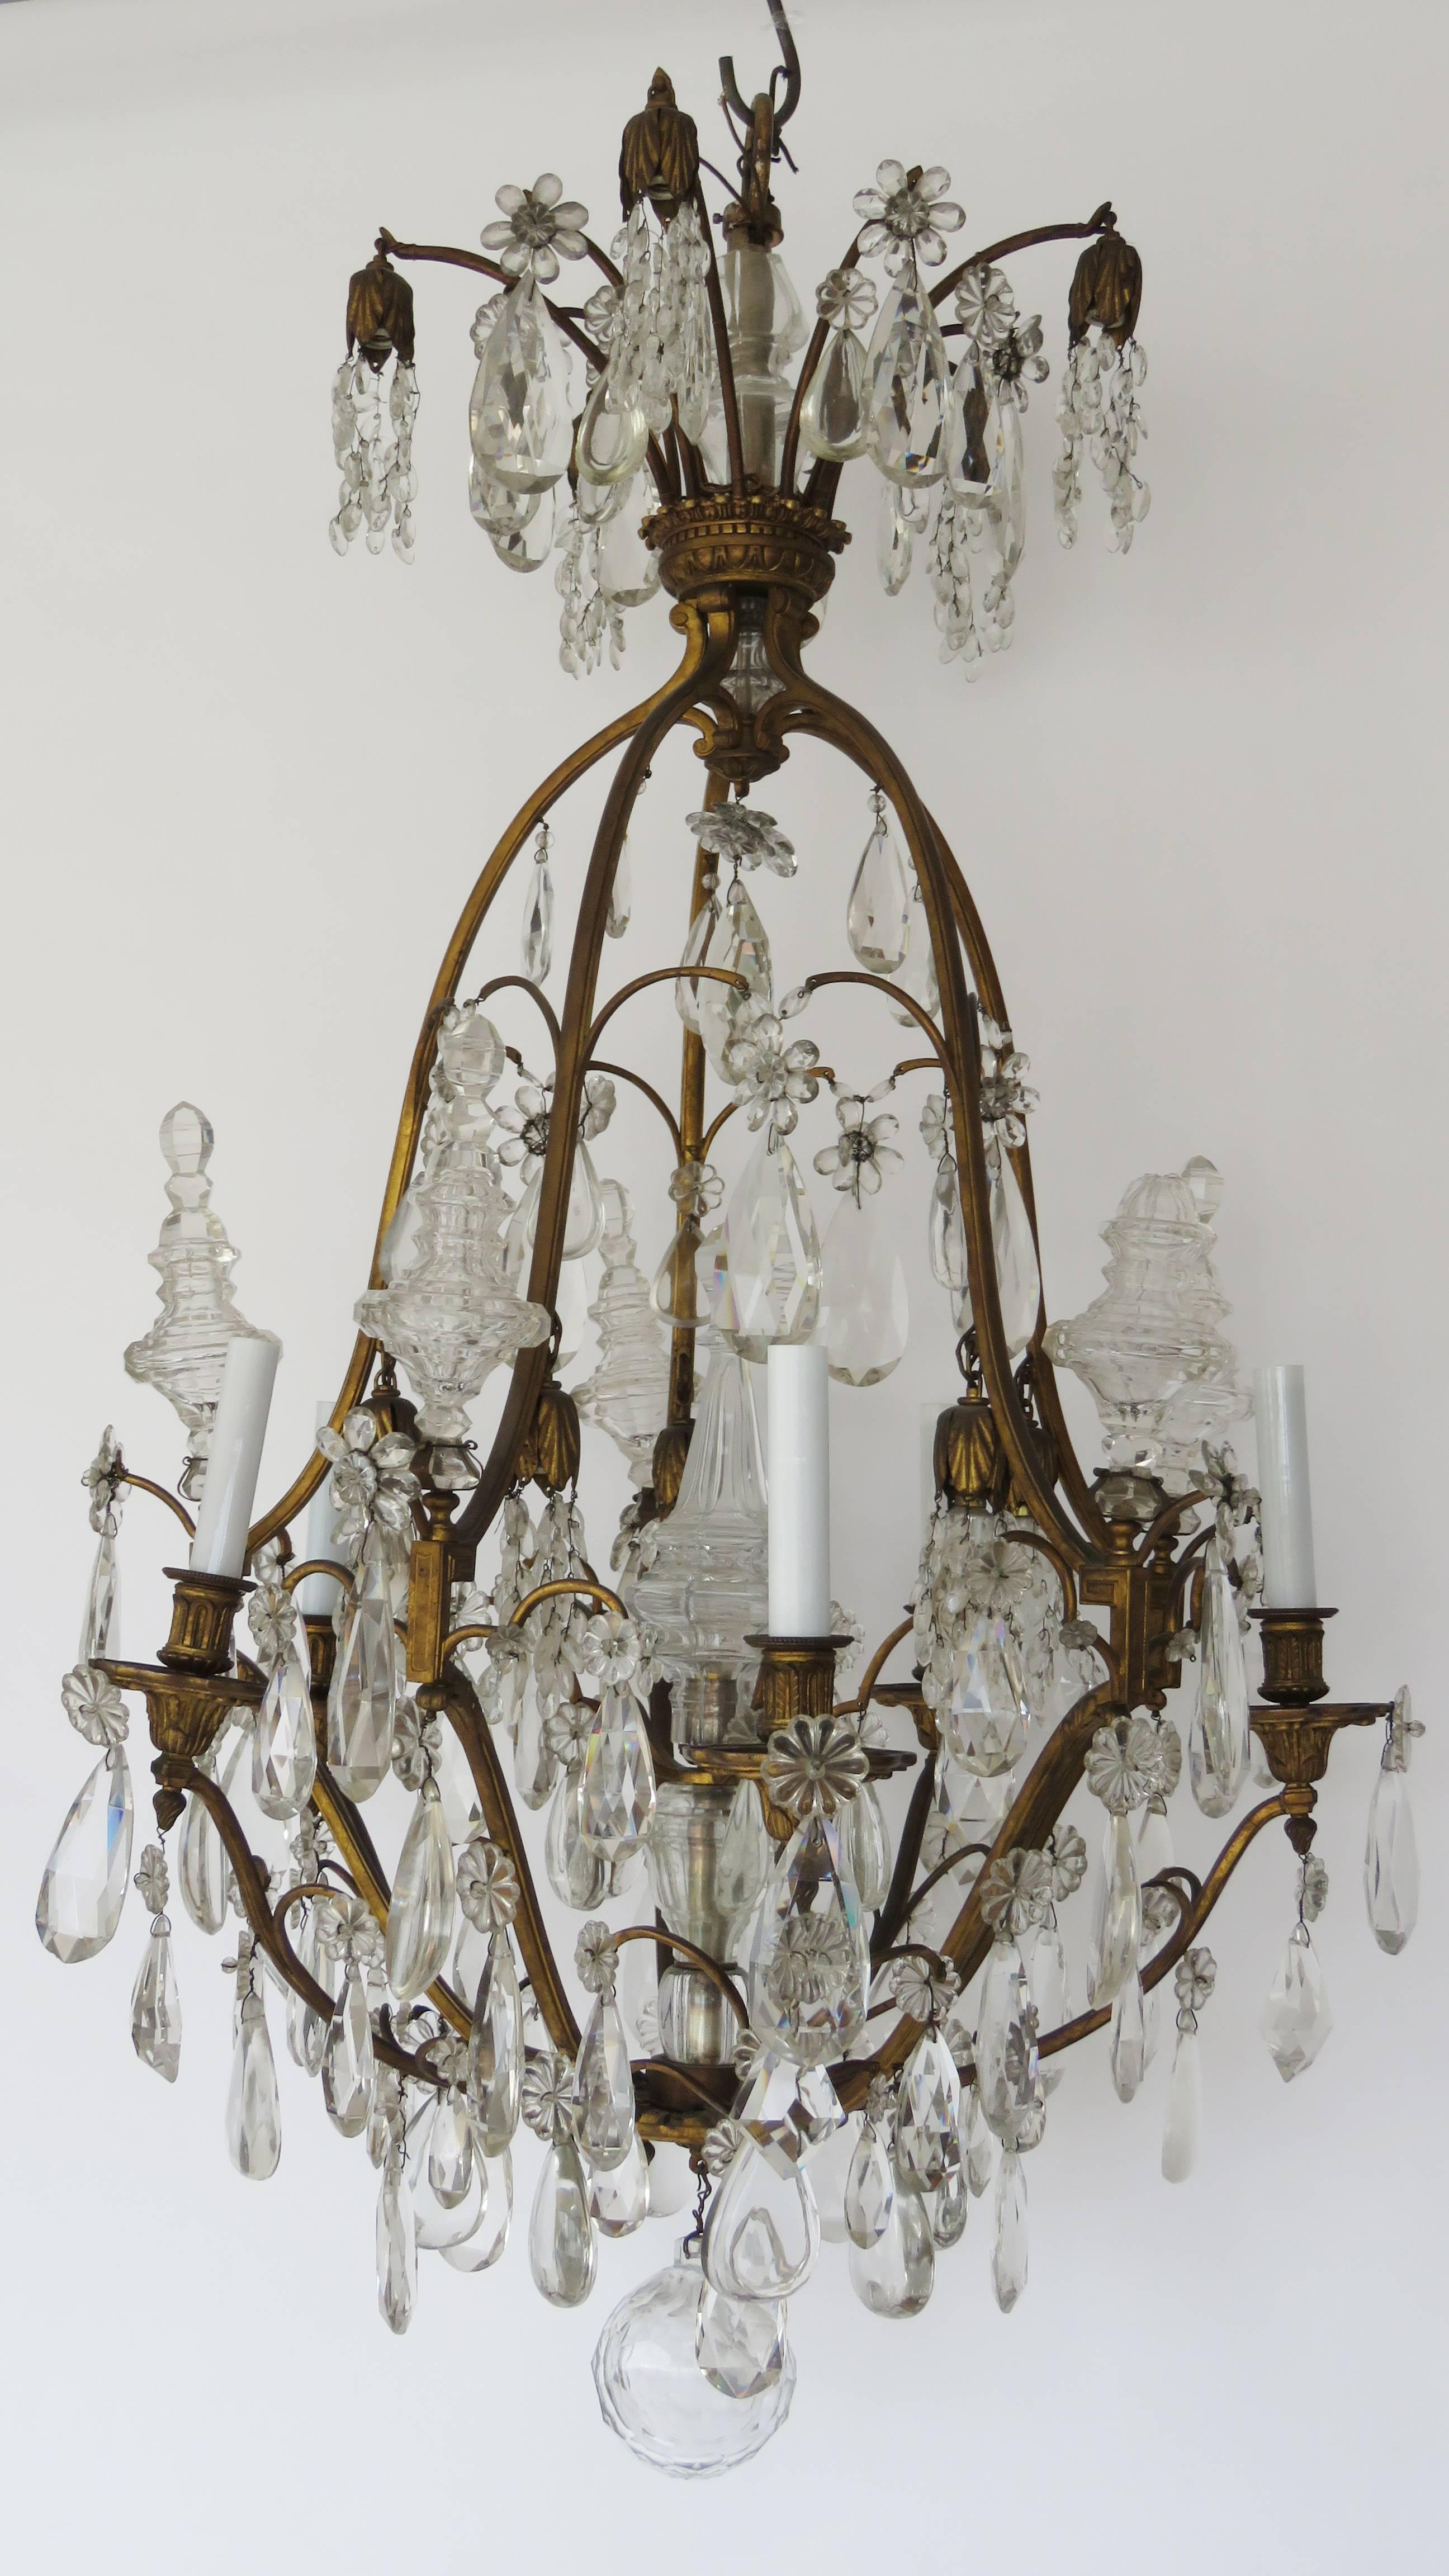 Impressive chandelier with antique finish gilt bronze gilt corona supporting crystal prisms and four fine bronze arms supporting candle lights and hanging crystal prisms and rosette pendants. Central cut-glass sphere. Total number lights: 6+5+5. One